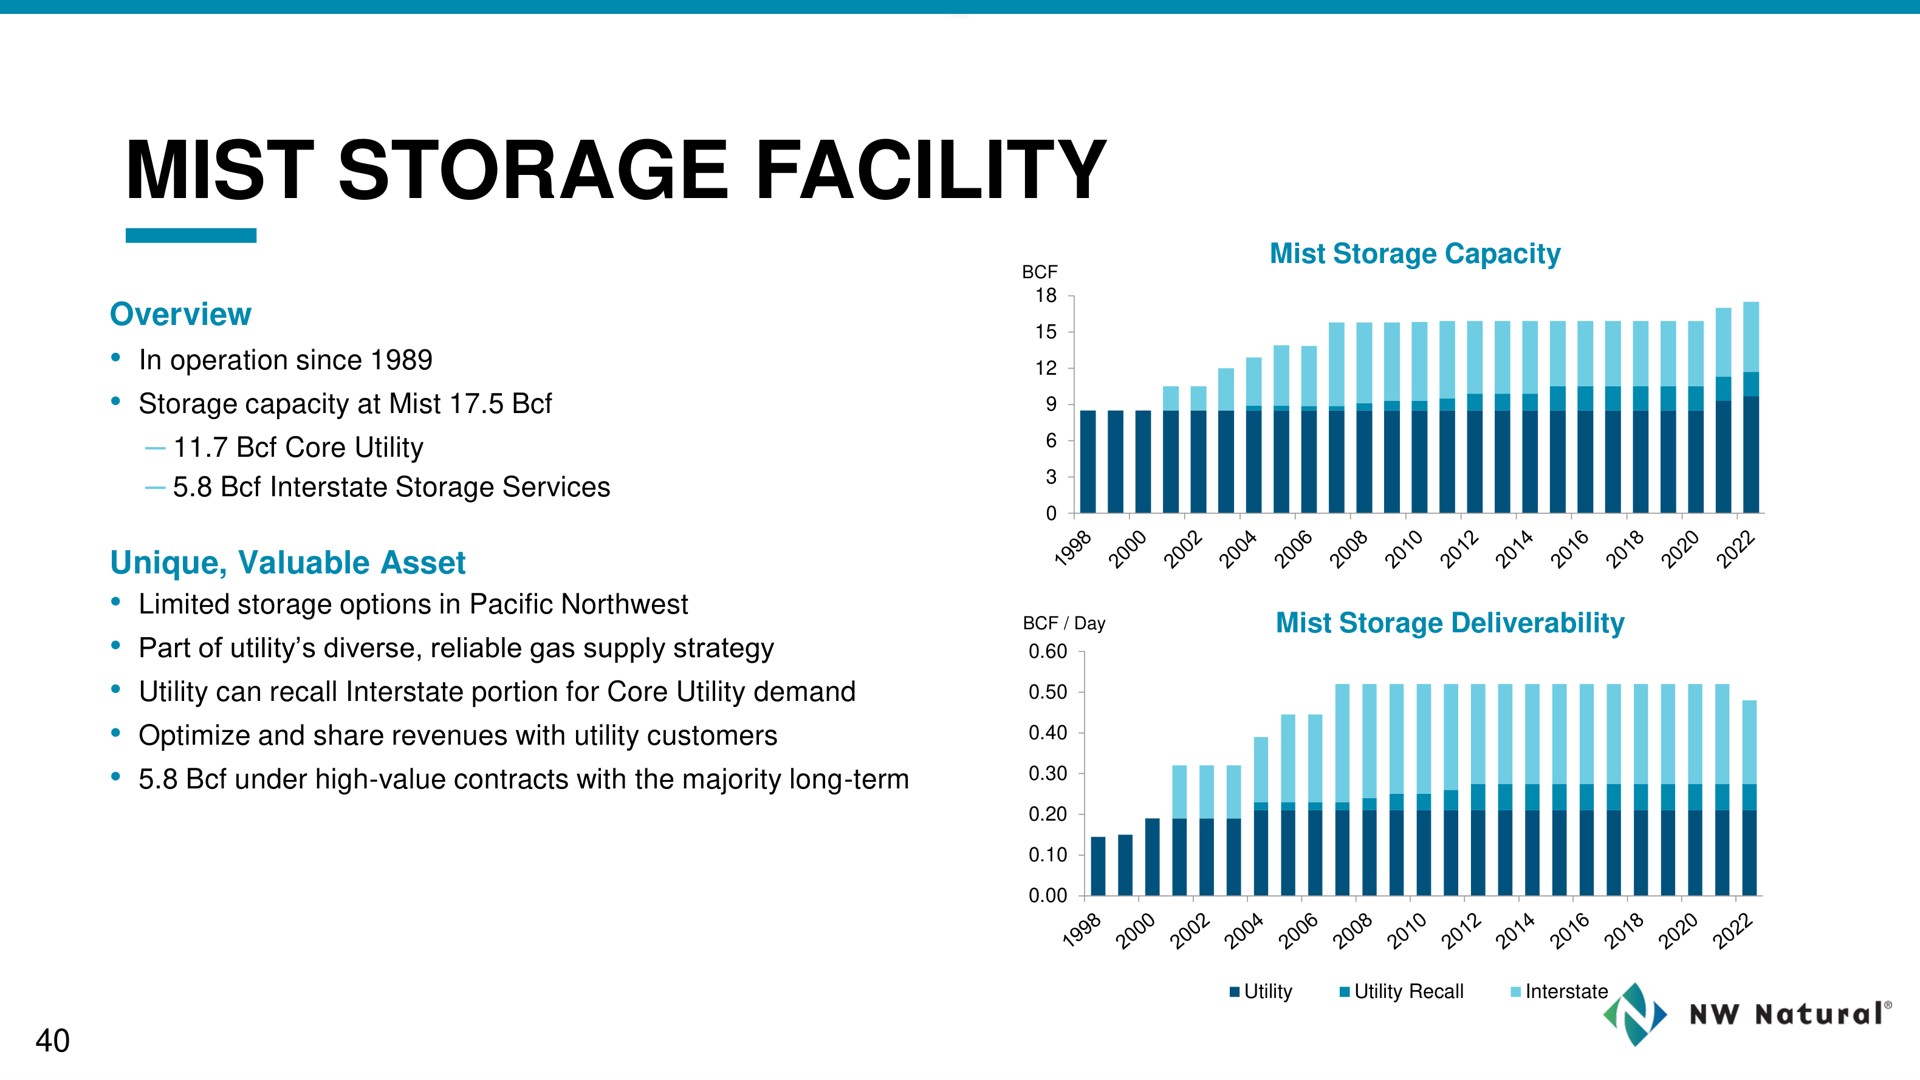 mist storage facility | NW Natural Holdings